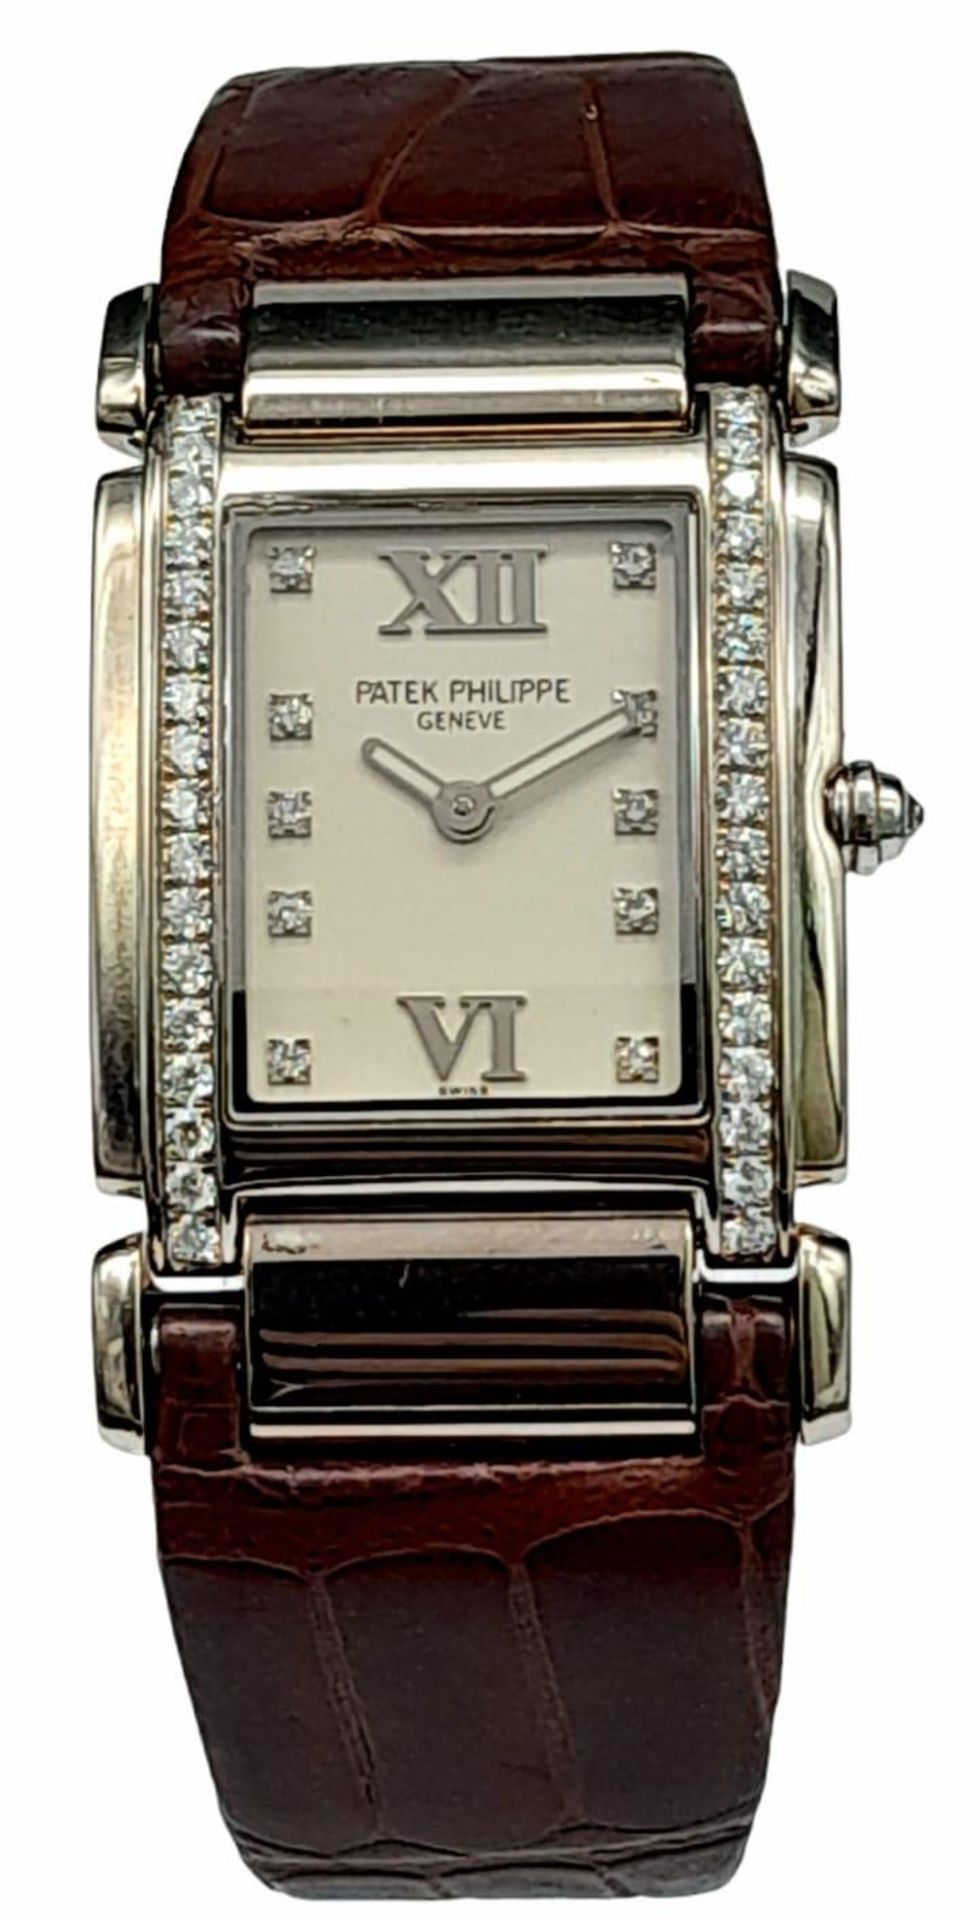 A Vintage Patek Philippe 18K White Gold and Diamond Ladies Watch. Brown leather strap with 18k